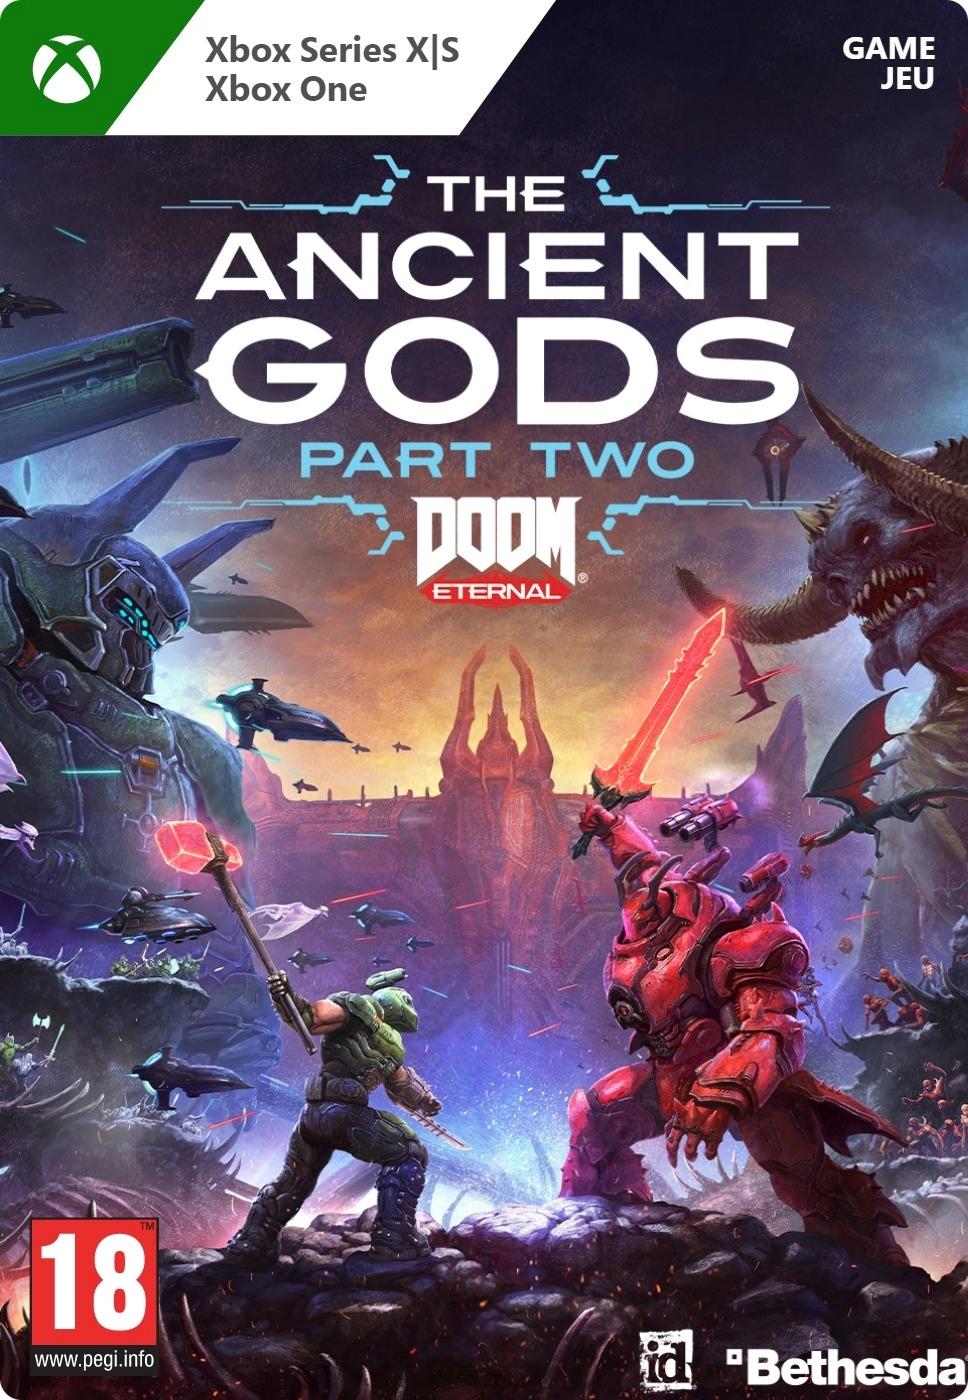 DOOM Eternal: The Ancient Gods - Part Two - Xbox Series X/Xbox One - Game | G7Q-00164 (8c7b6a0e-38b3-d44a-b182-99ac5dab1c1f)